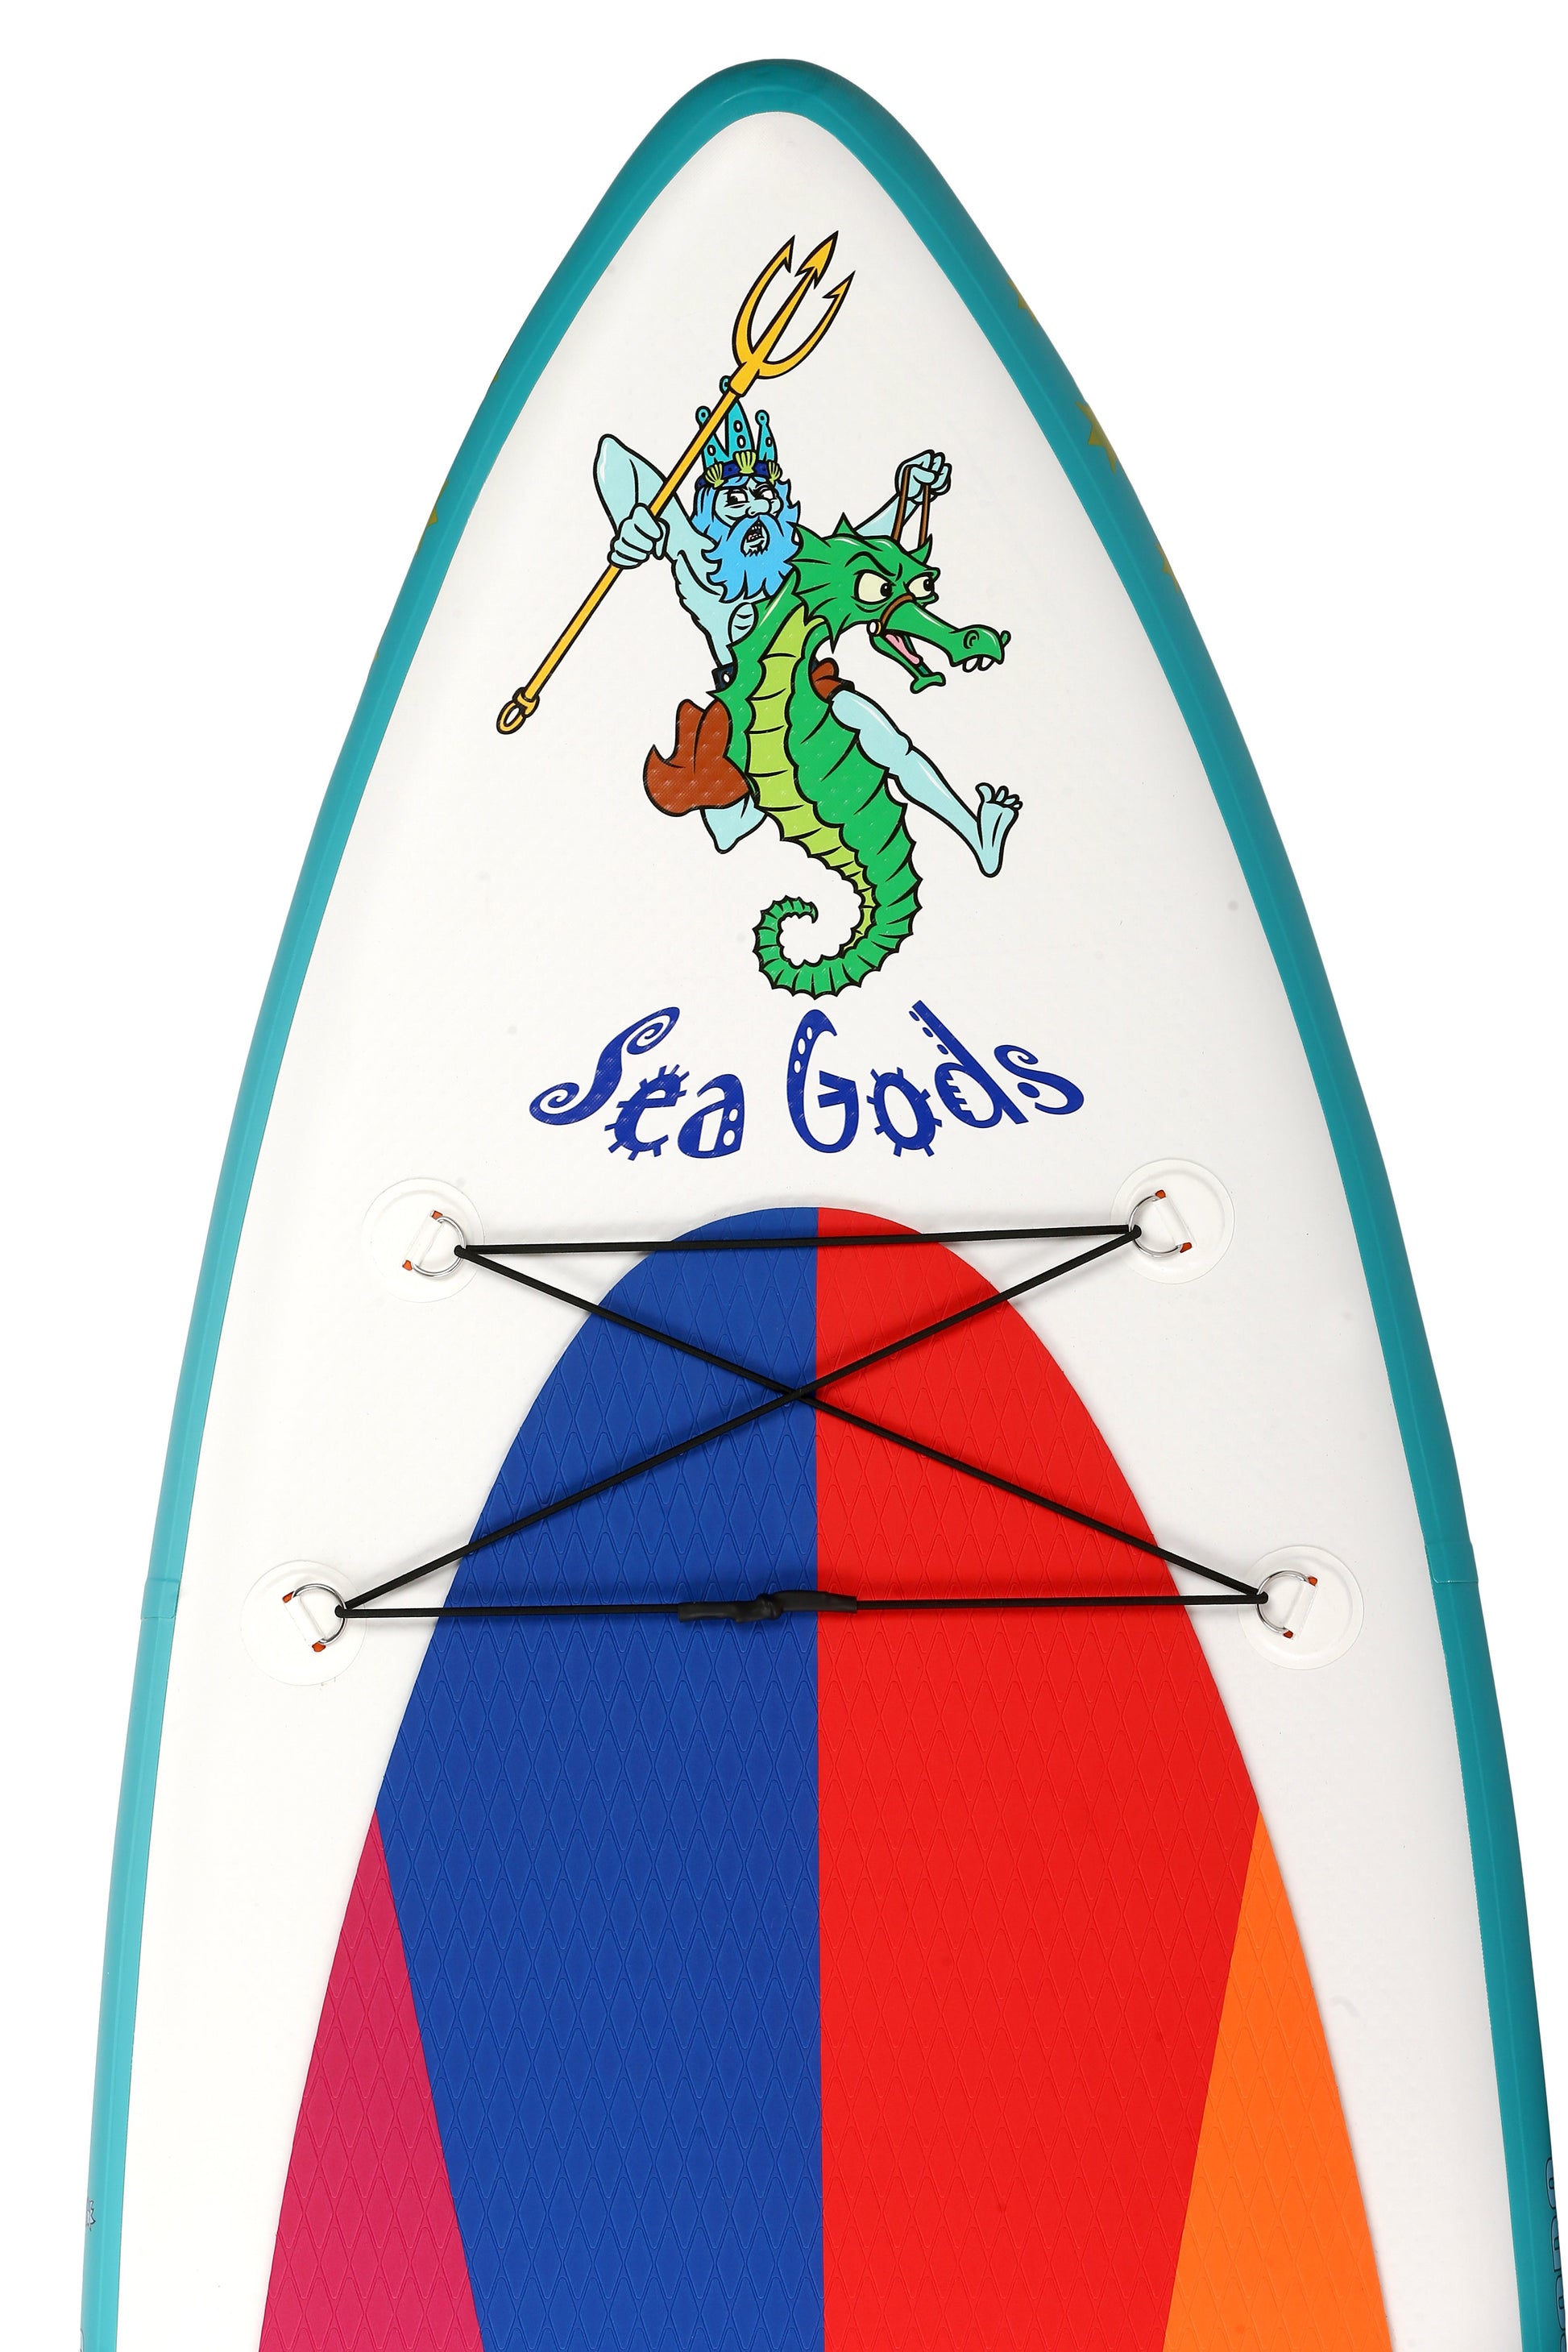 inflatable paddle board for kids